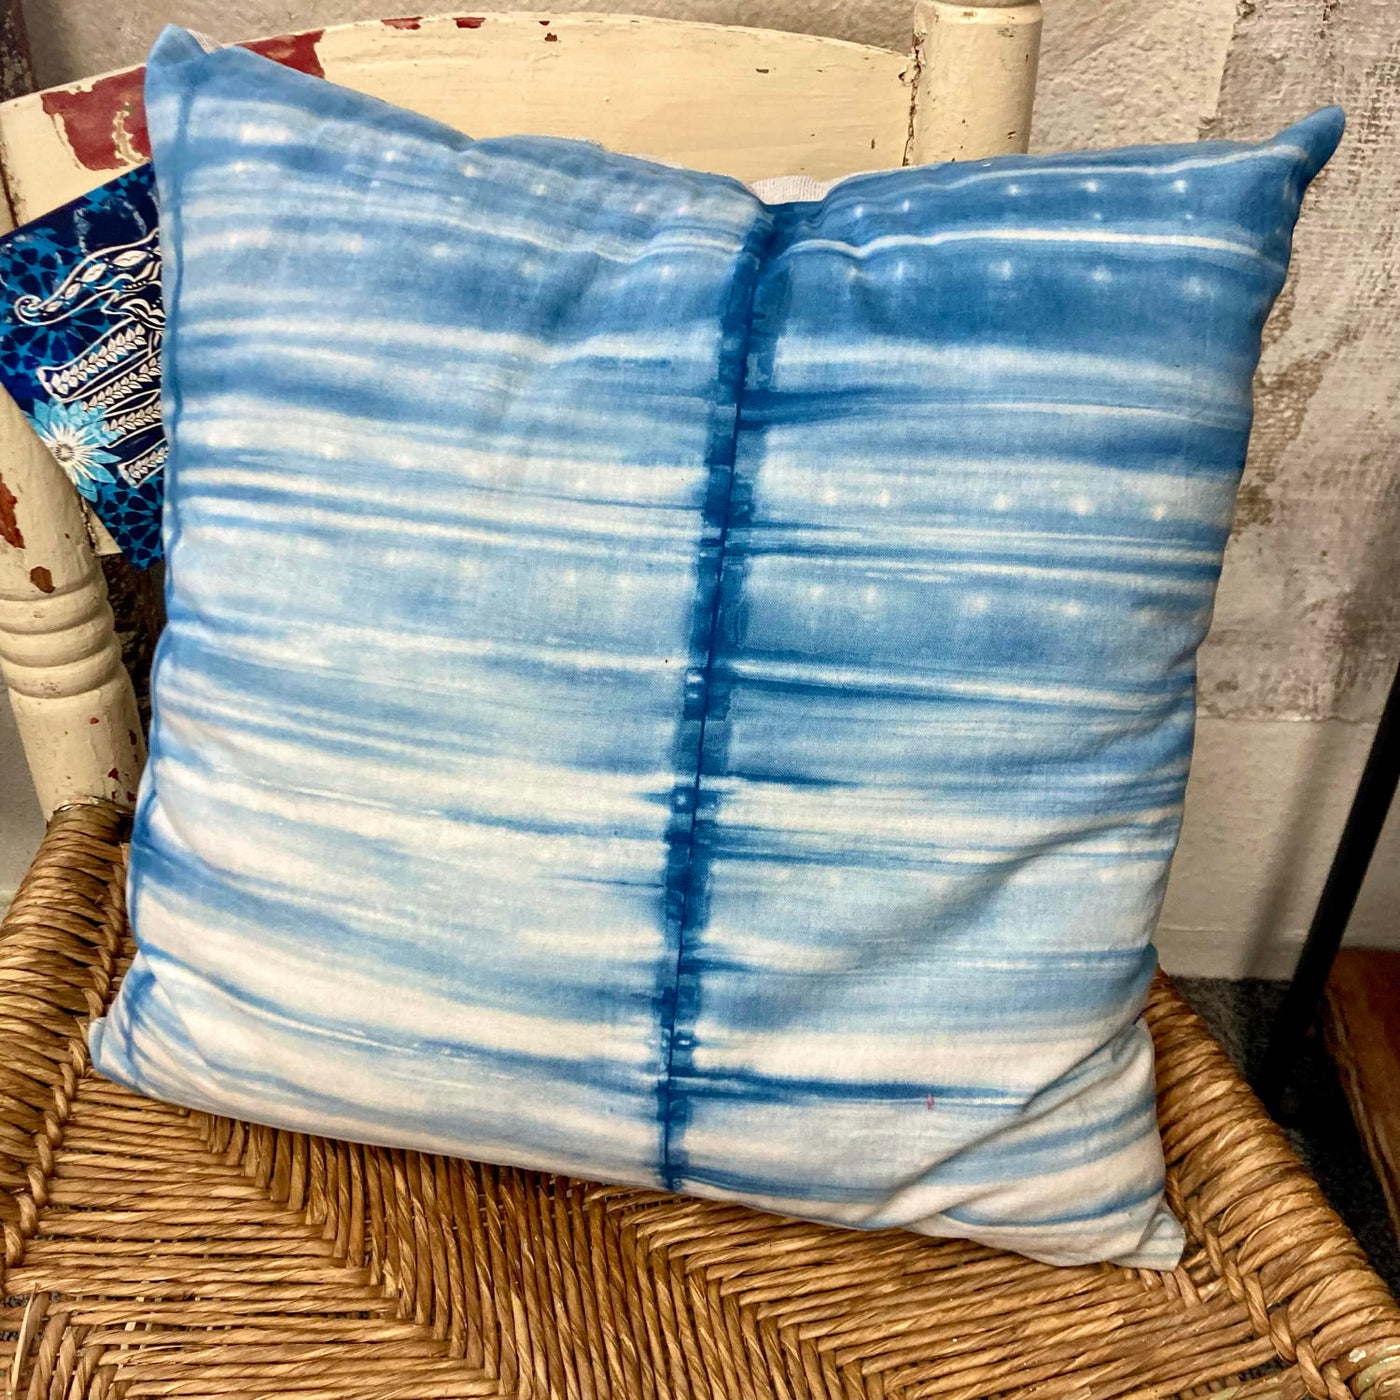 Block Printed and Indigo Dyed Clam Shell Pillow by Valori Wells